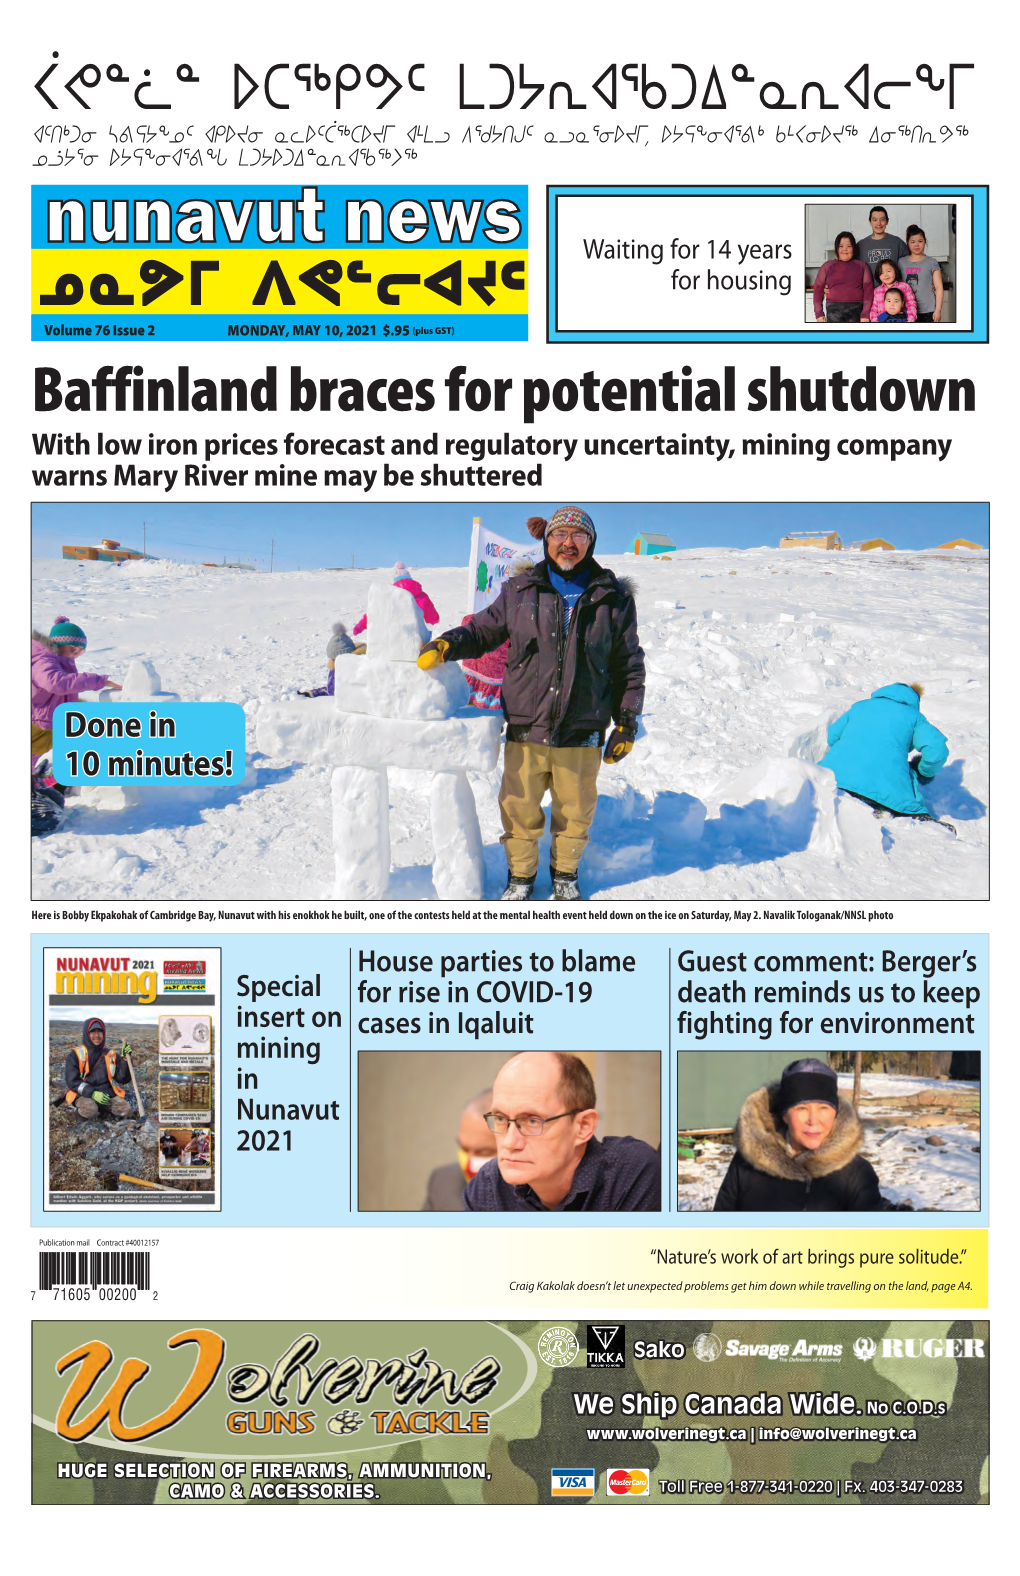 Baffinland Braces for Potential Shutdown with Low Iron Prices Forecast and Regulatory Uncertainty, Mining Company Warns Mary River Mine May Be Shuttered